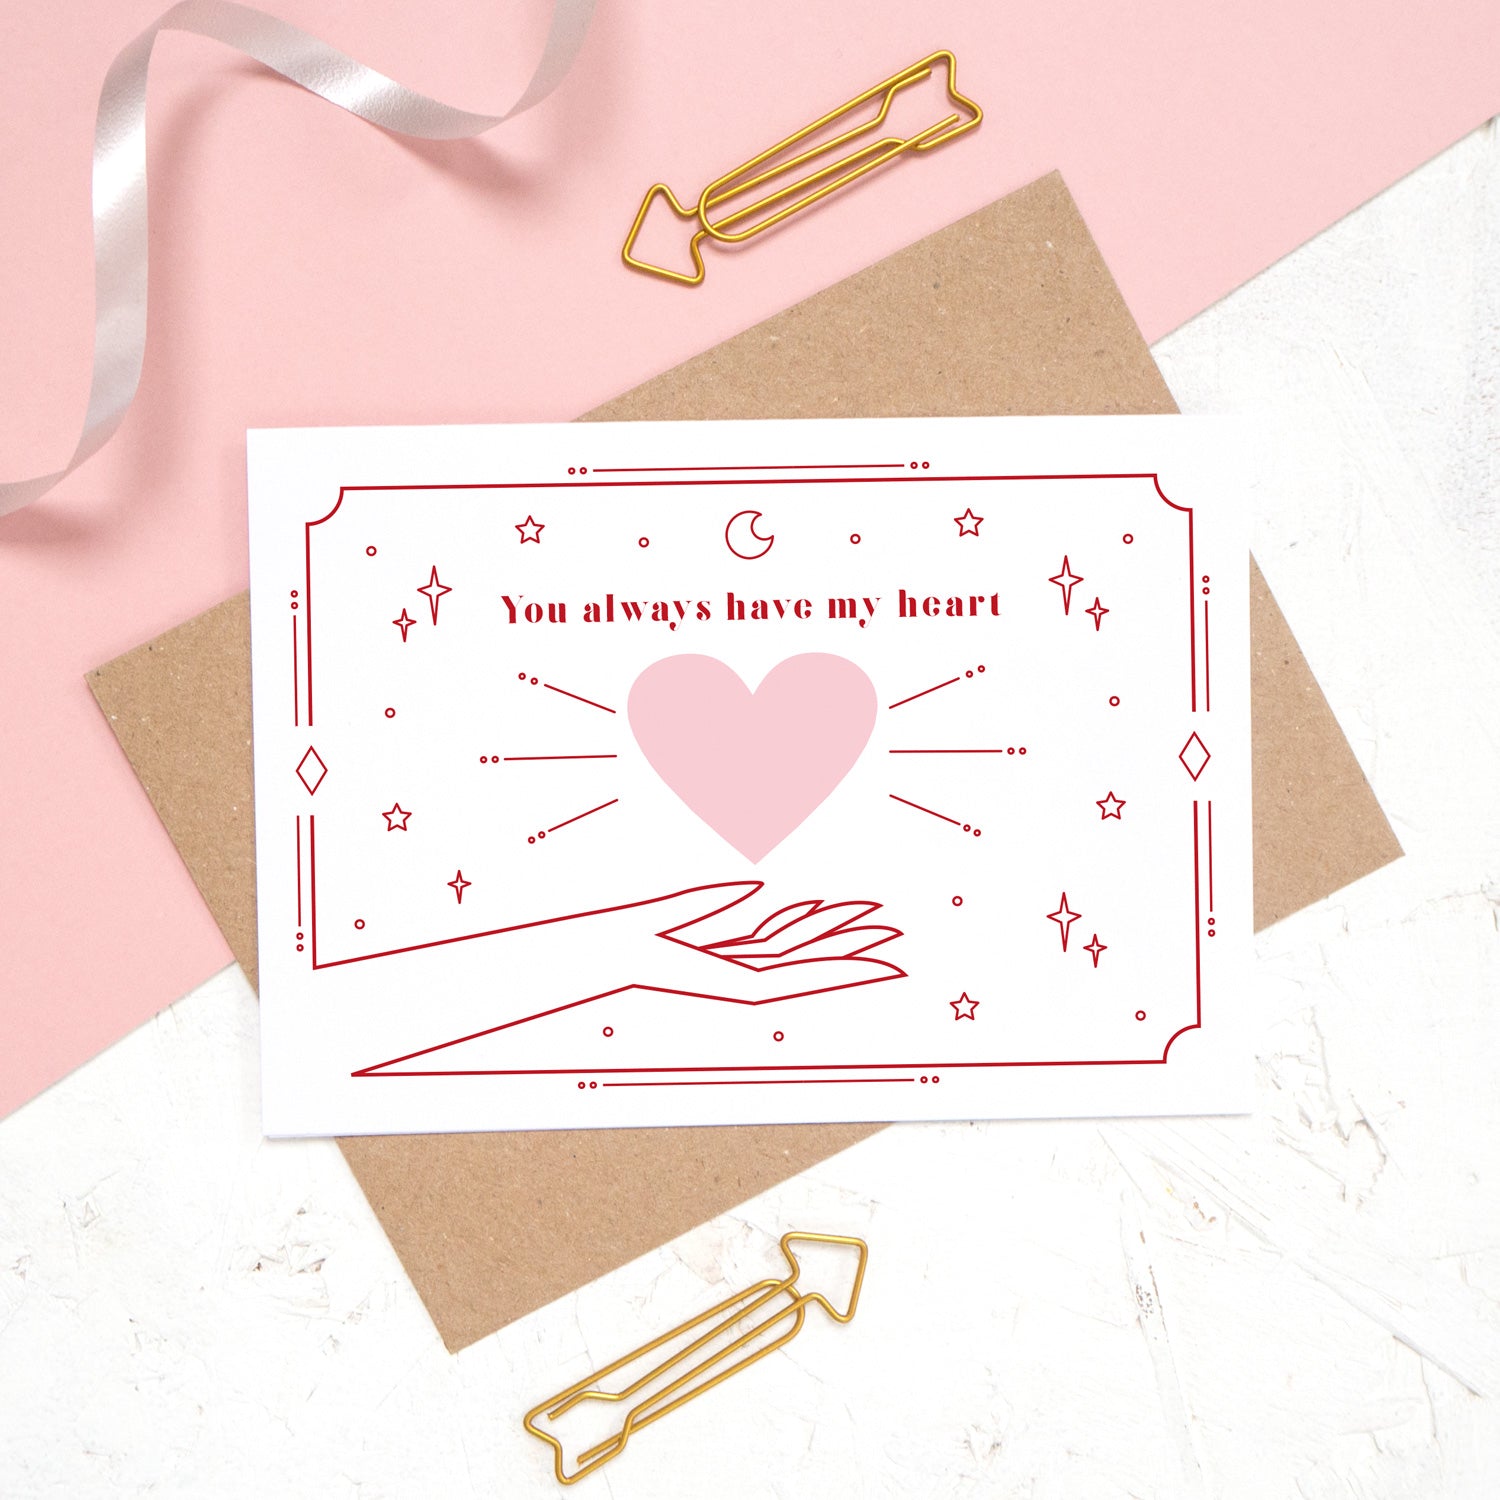 You always have my heart love and romance card designed by Joanne Hawker. This card features the phrase 'you always have my heart' with a heart and cosmic decor.